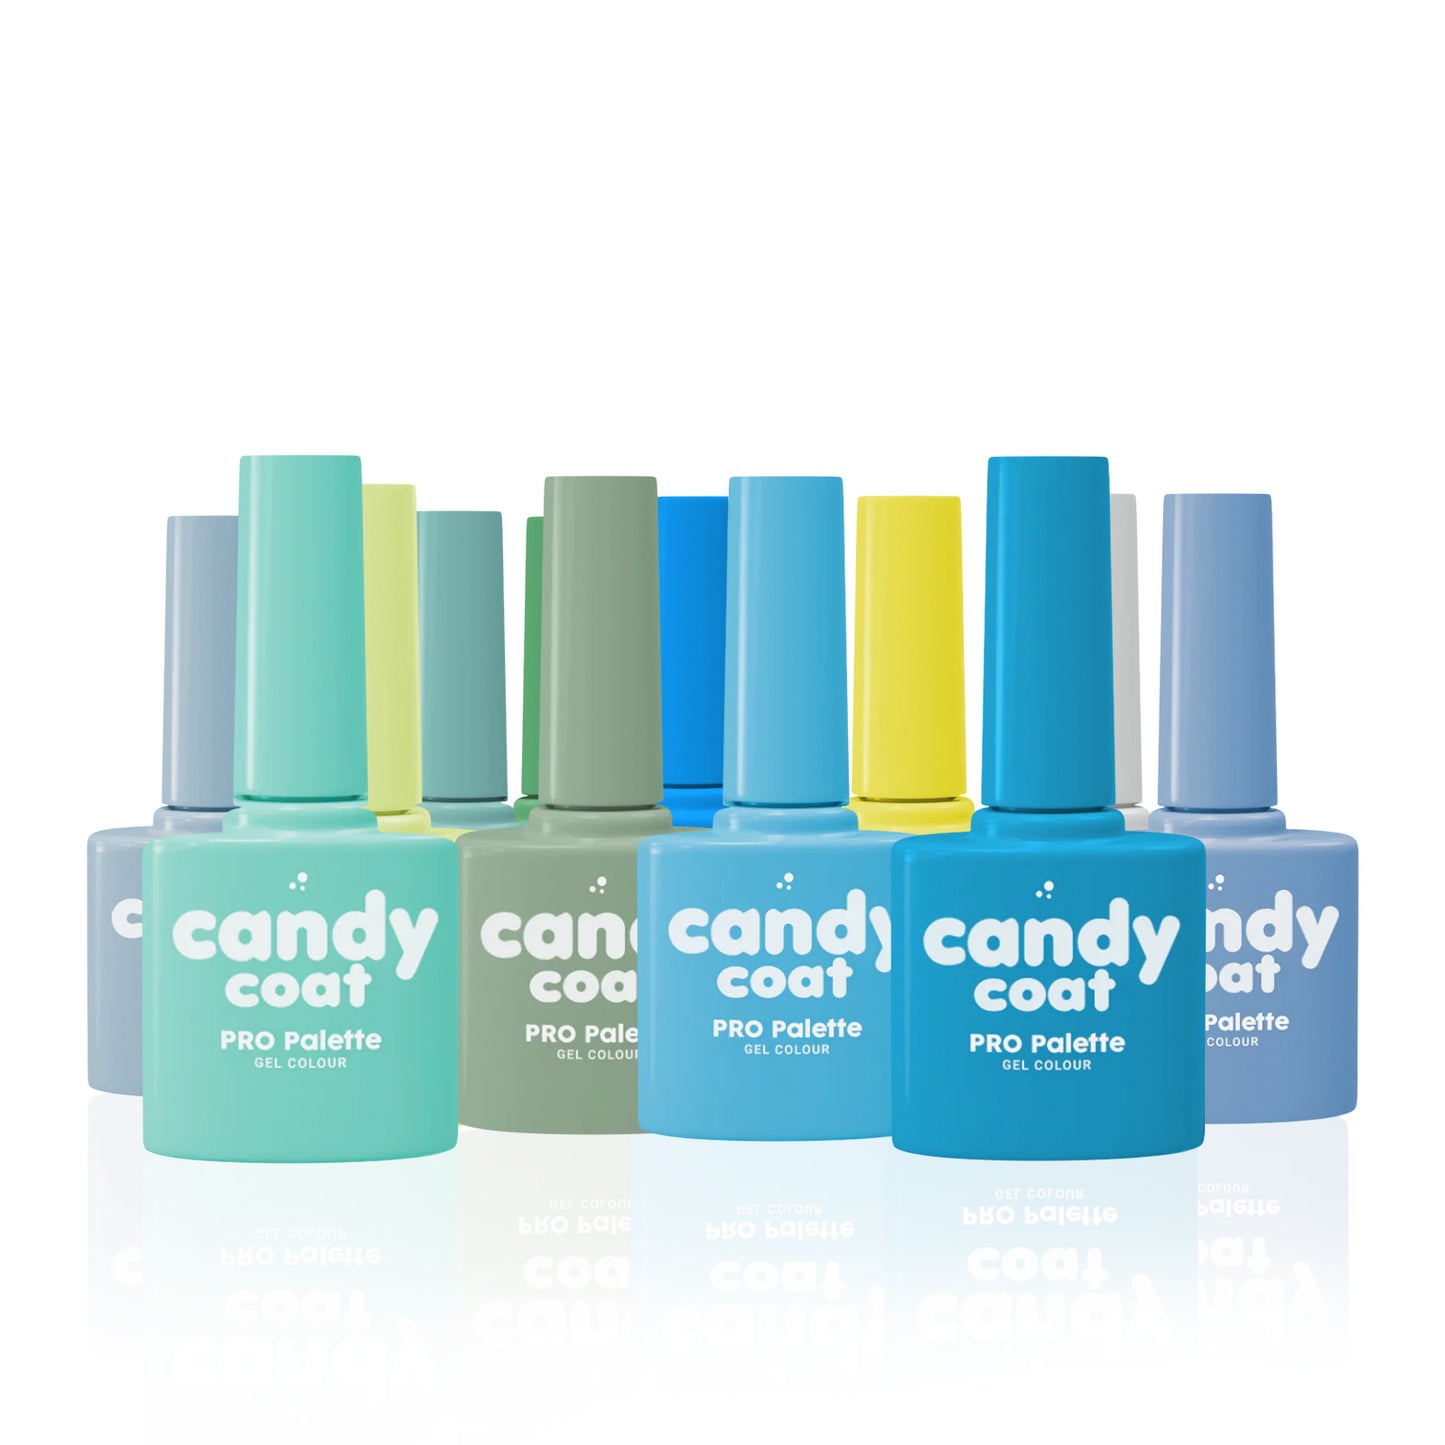 Candy Coat - PRO Palette Under the Sea - Candy Coat